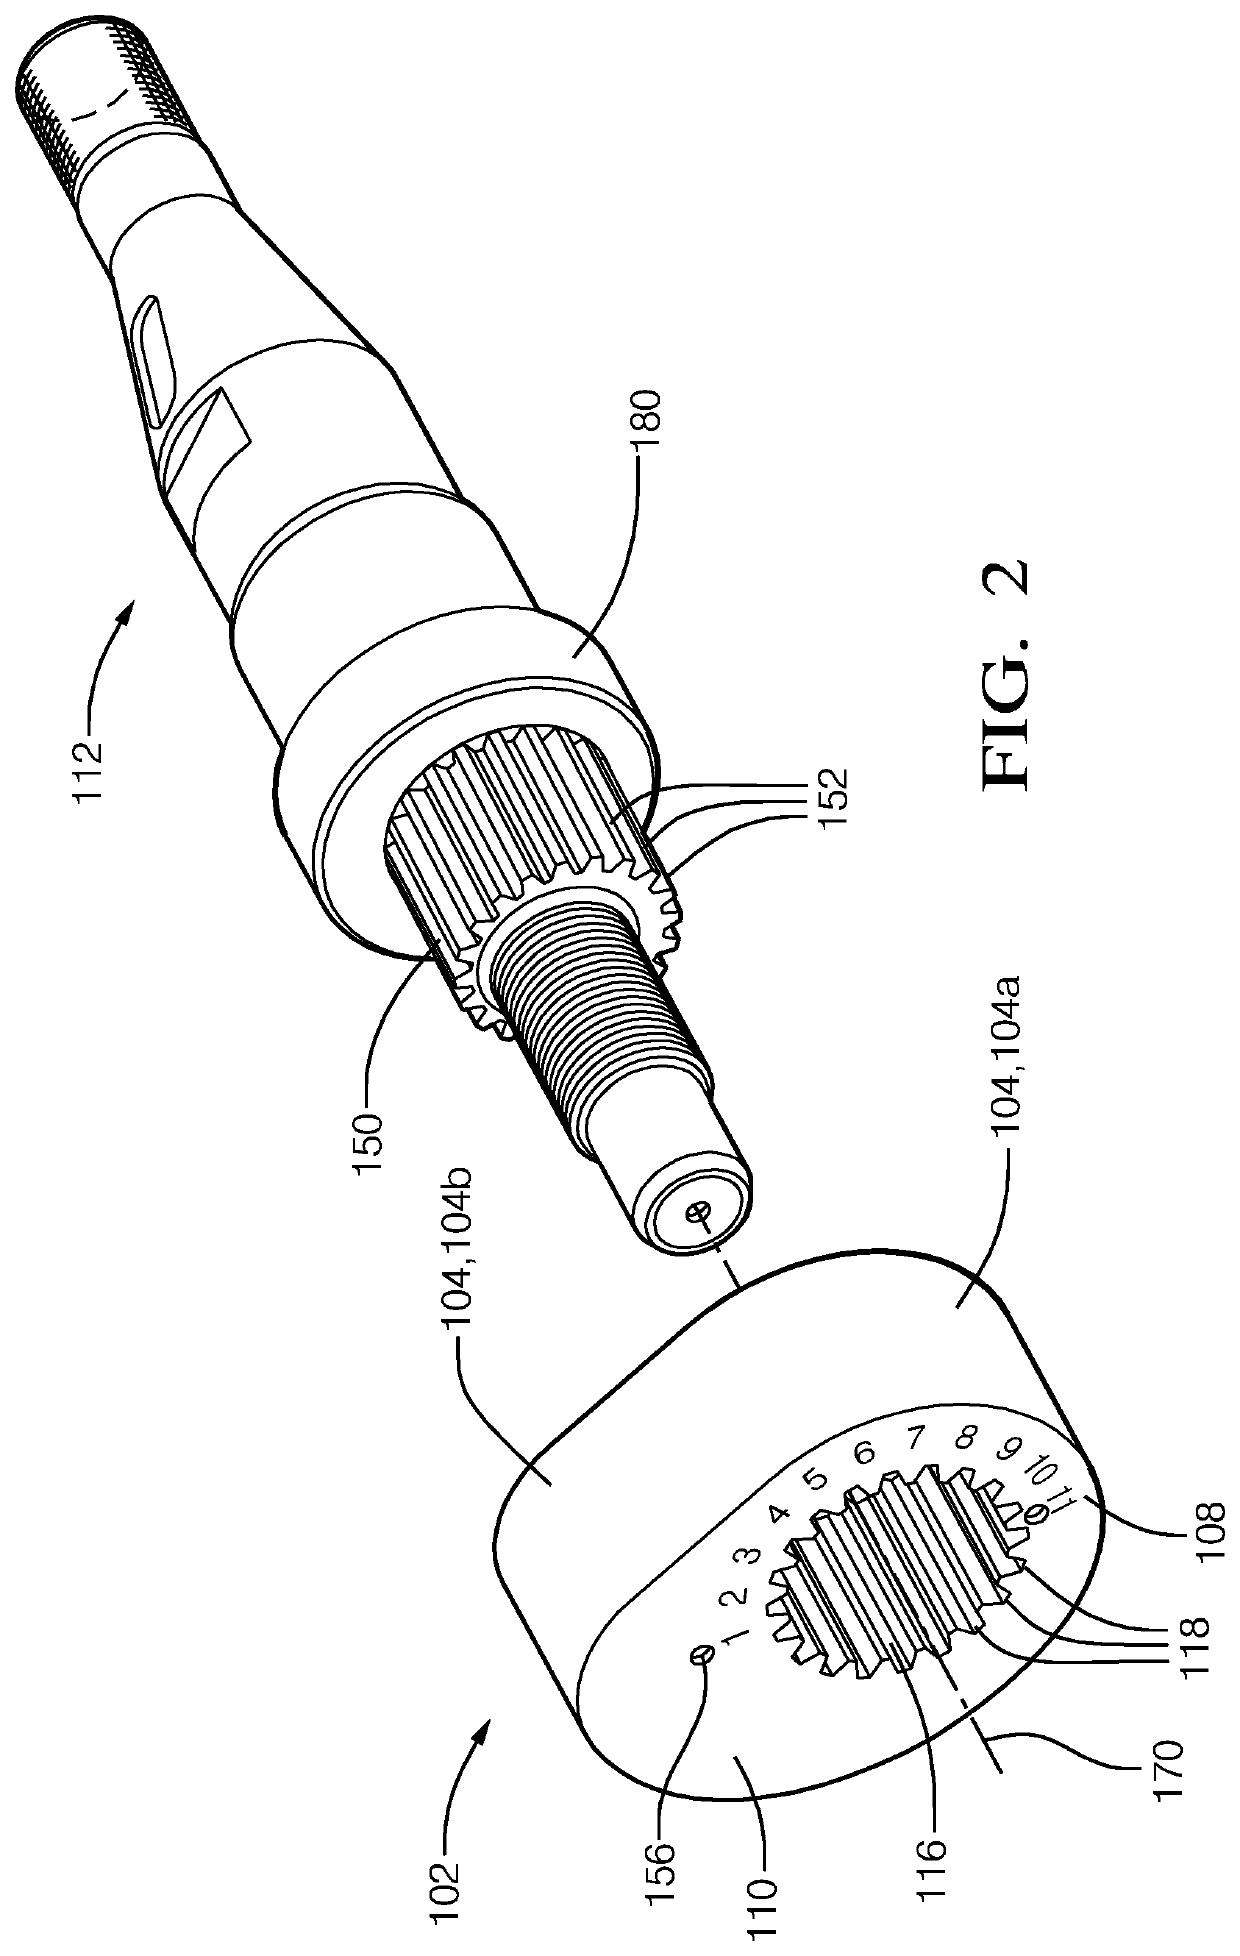 Driveshaft assembly with indexing means